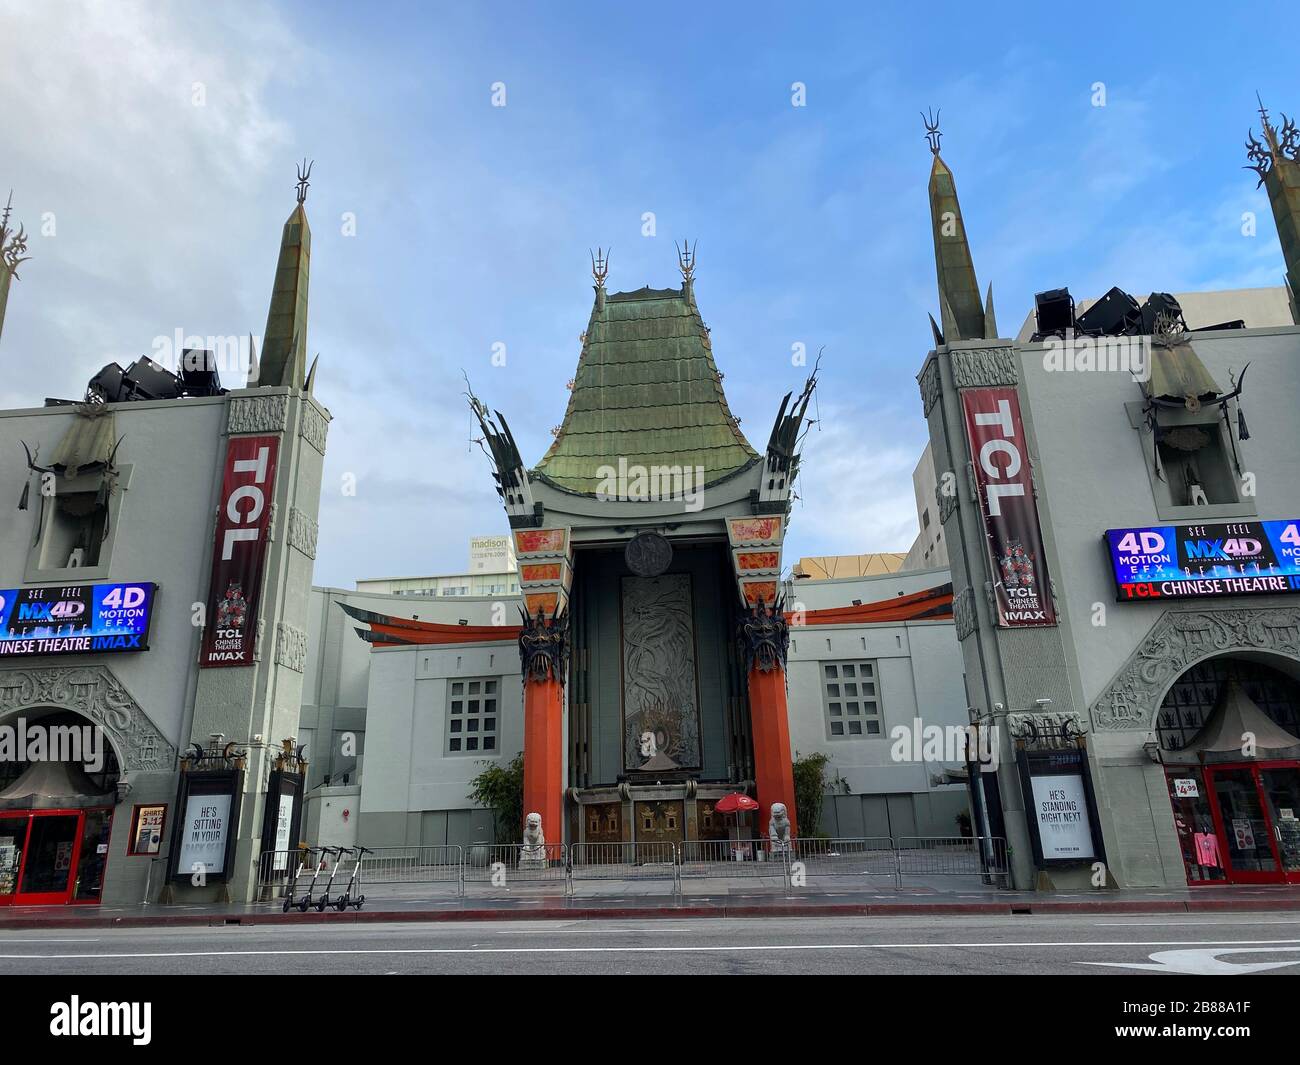 The world famous landmark in Hollywood Chinese Theater usually crowded with tourists completely empty due to corona virus outbreak. Stock Photo